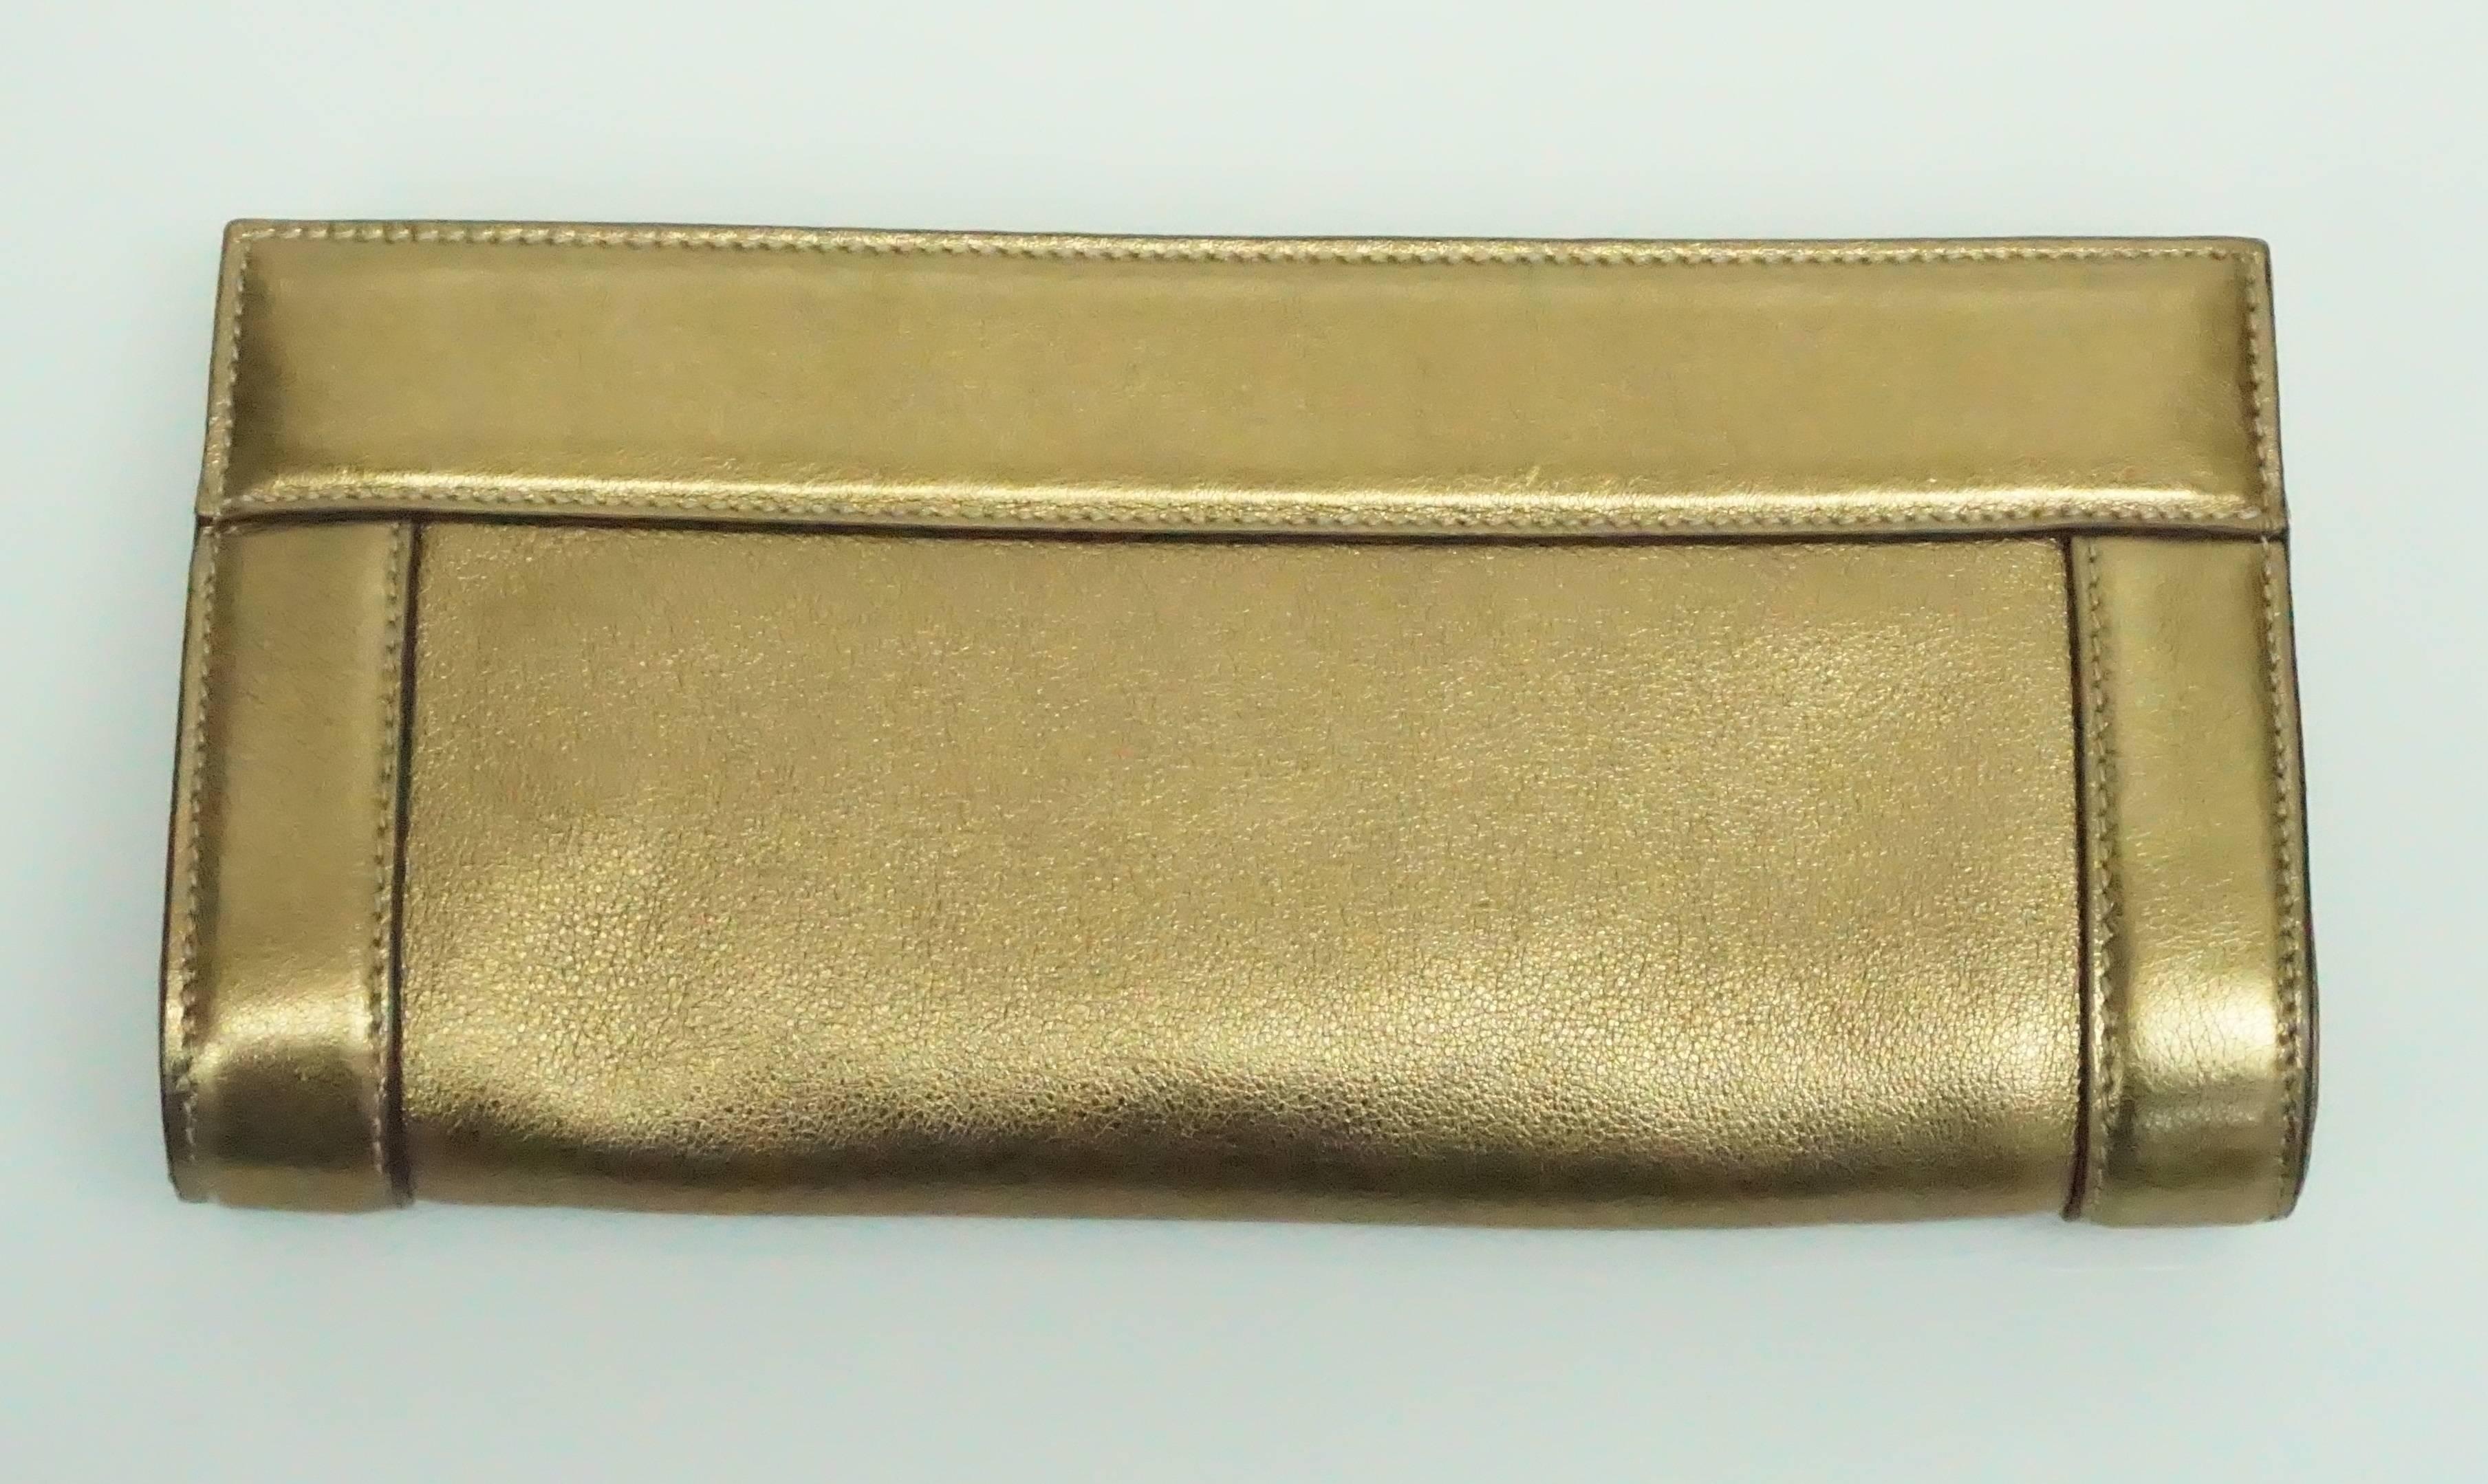 Gucci Bronze Leather and Gold Hardware Britt Clutch  This wonderful Bronze leather clutch has the top gold framing with two turnkey locks to secure the bag shut. It has a large GG also in the same gold hardware on the front of the bag. It has one